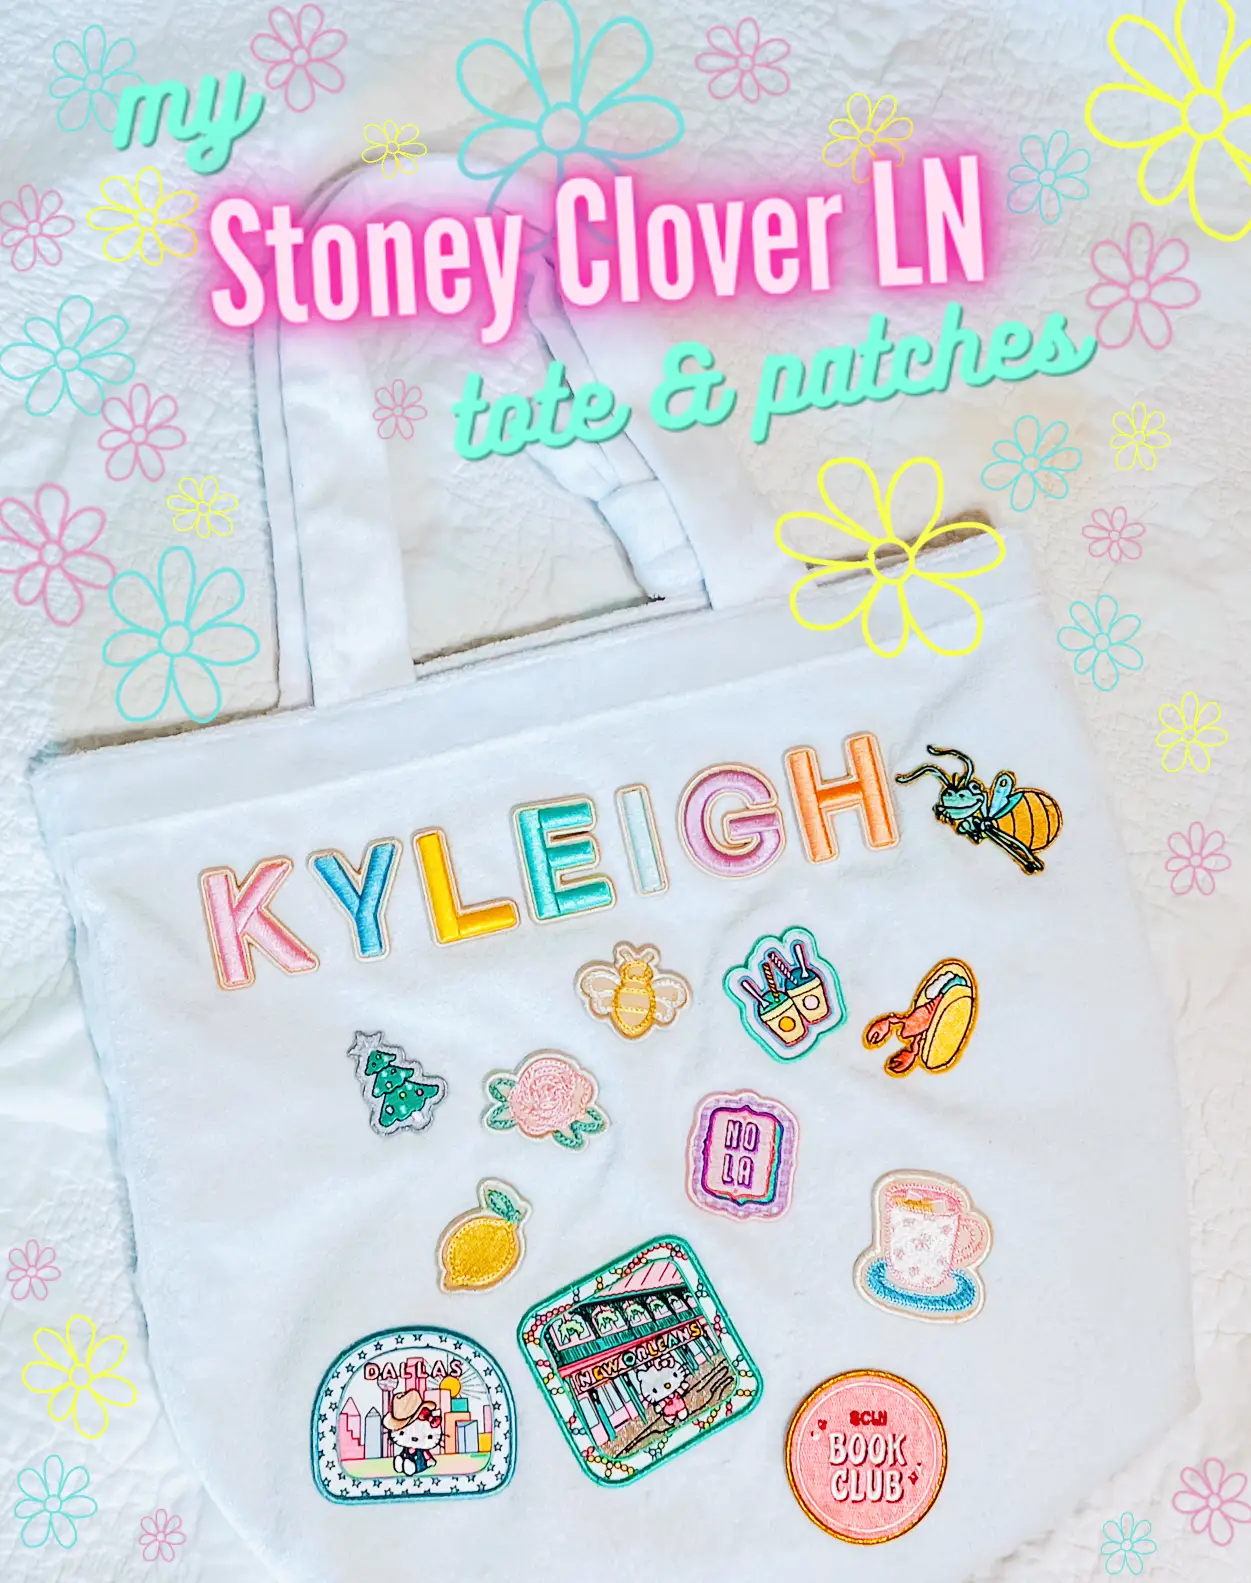 Stoney Clover Ln. tote for summer🌸🍋, Gallery posted by Kyleigh